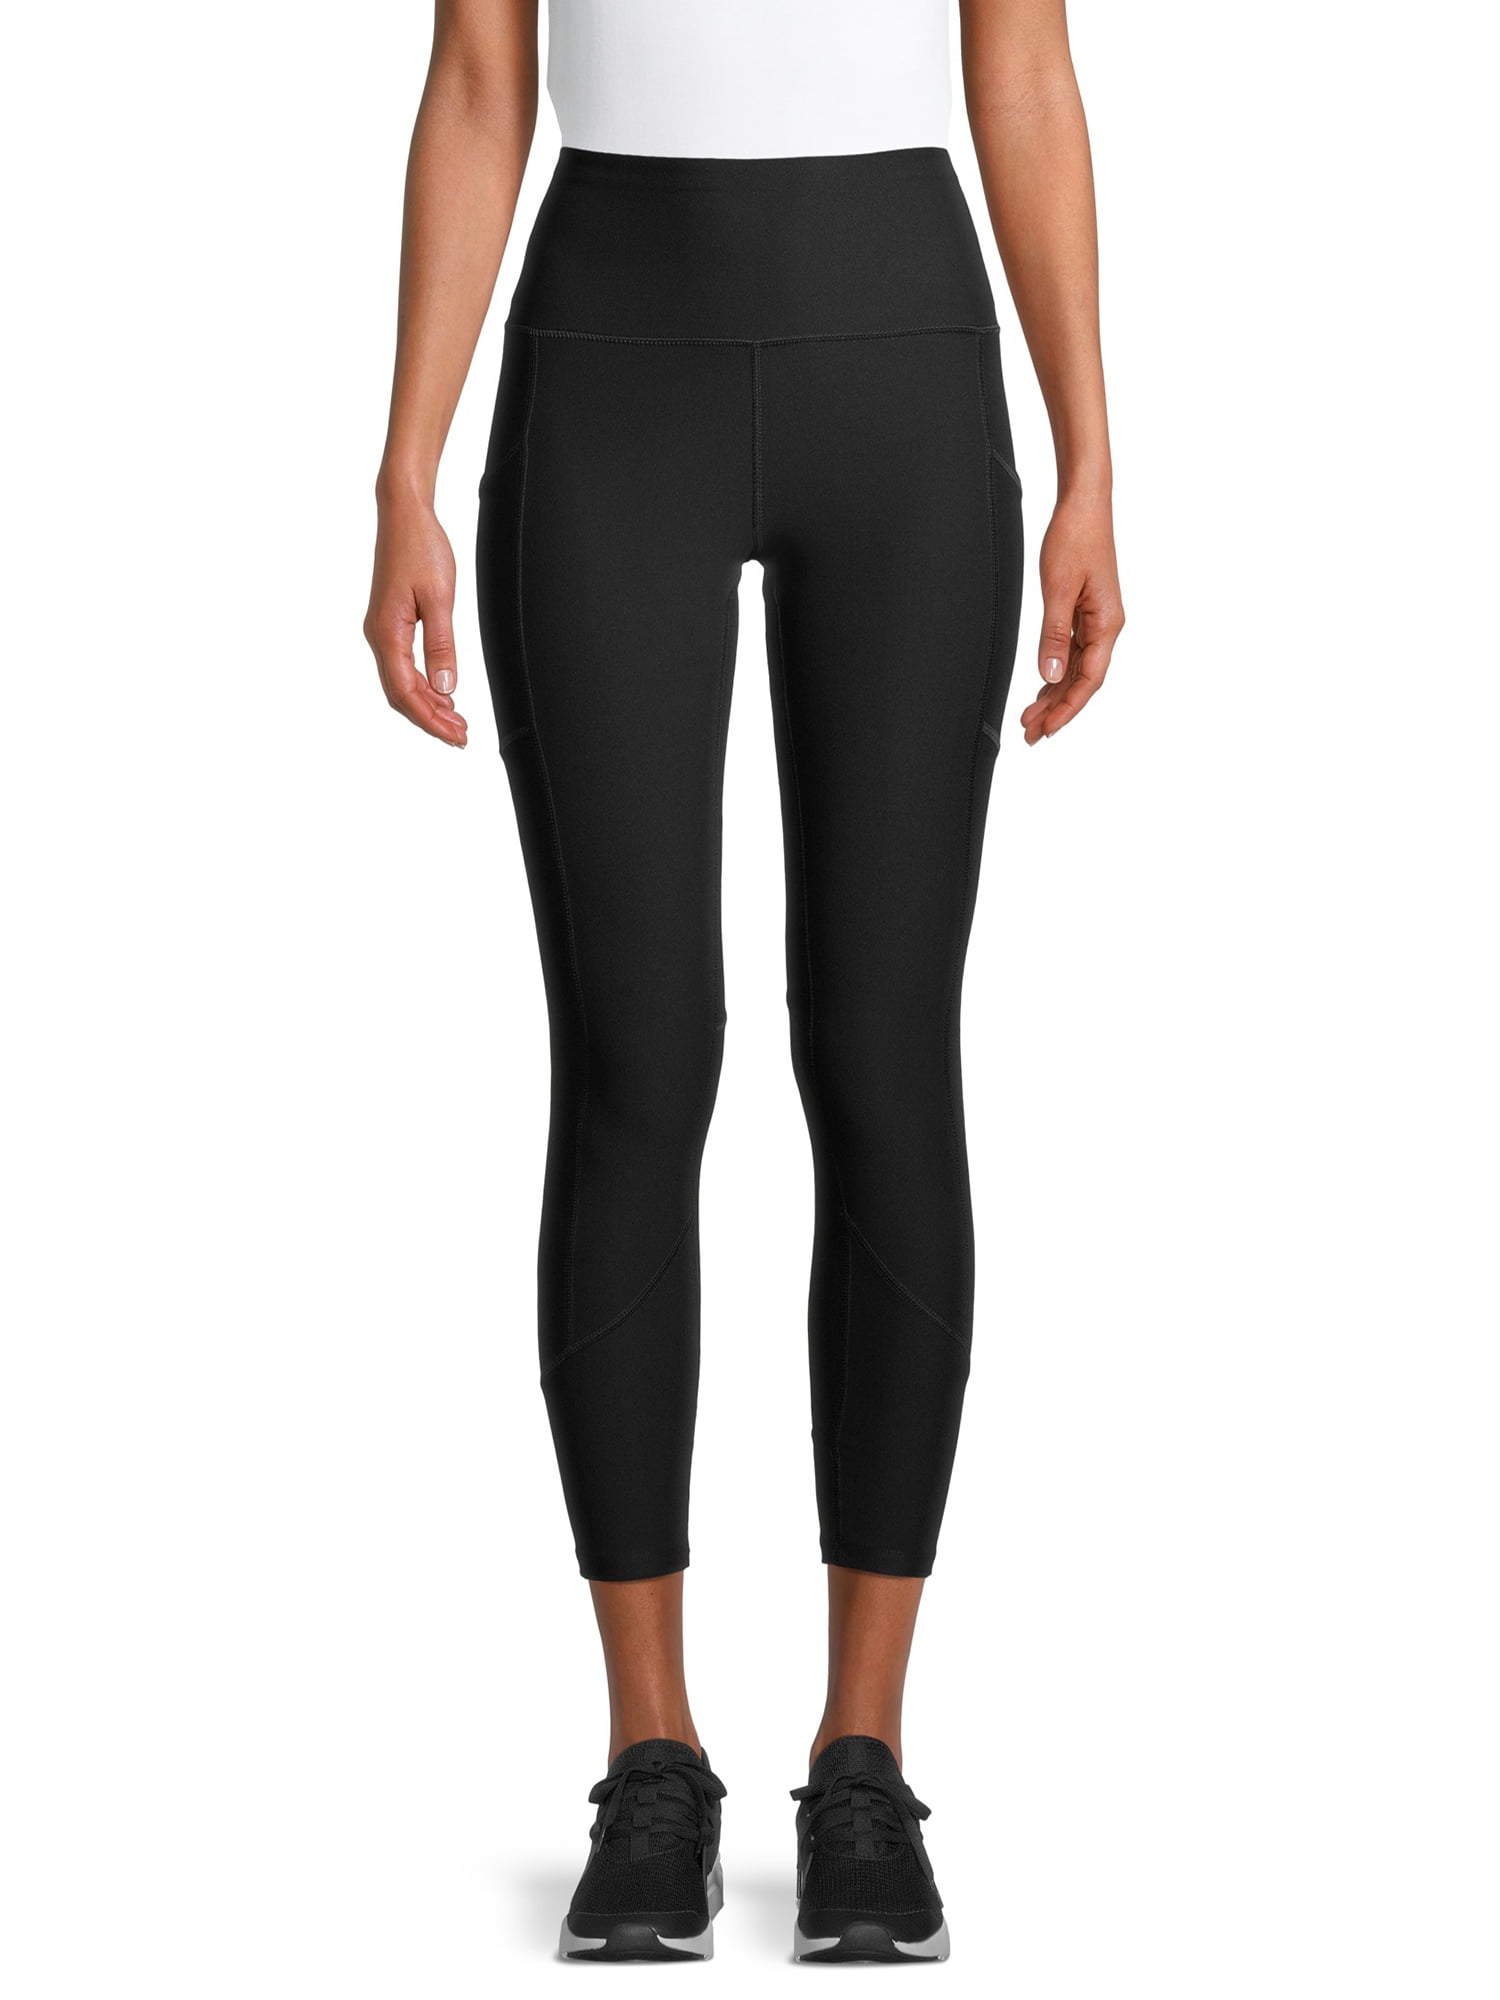 Layer 8 Women's Active 7/8 Leggings with Side Pockets